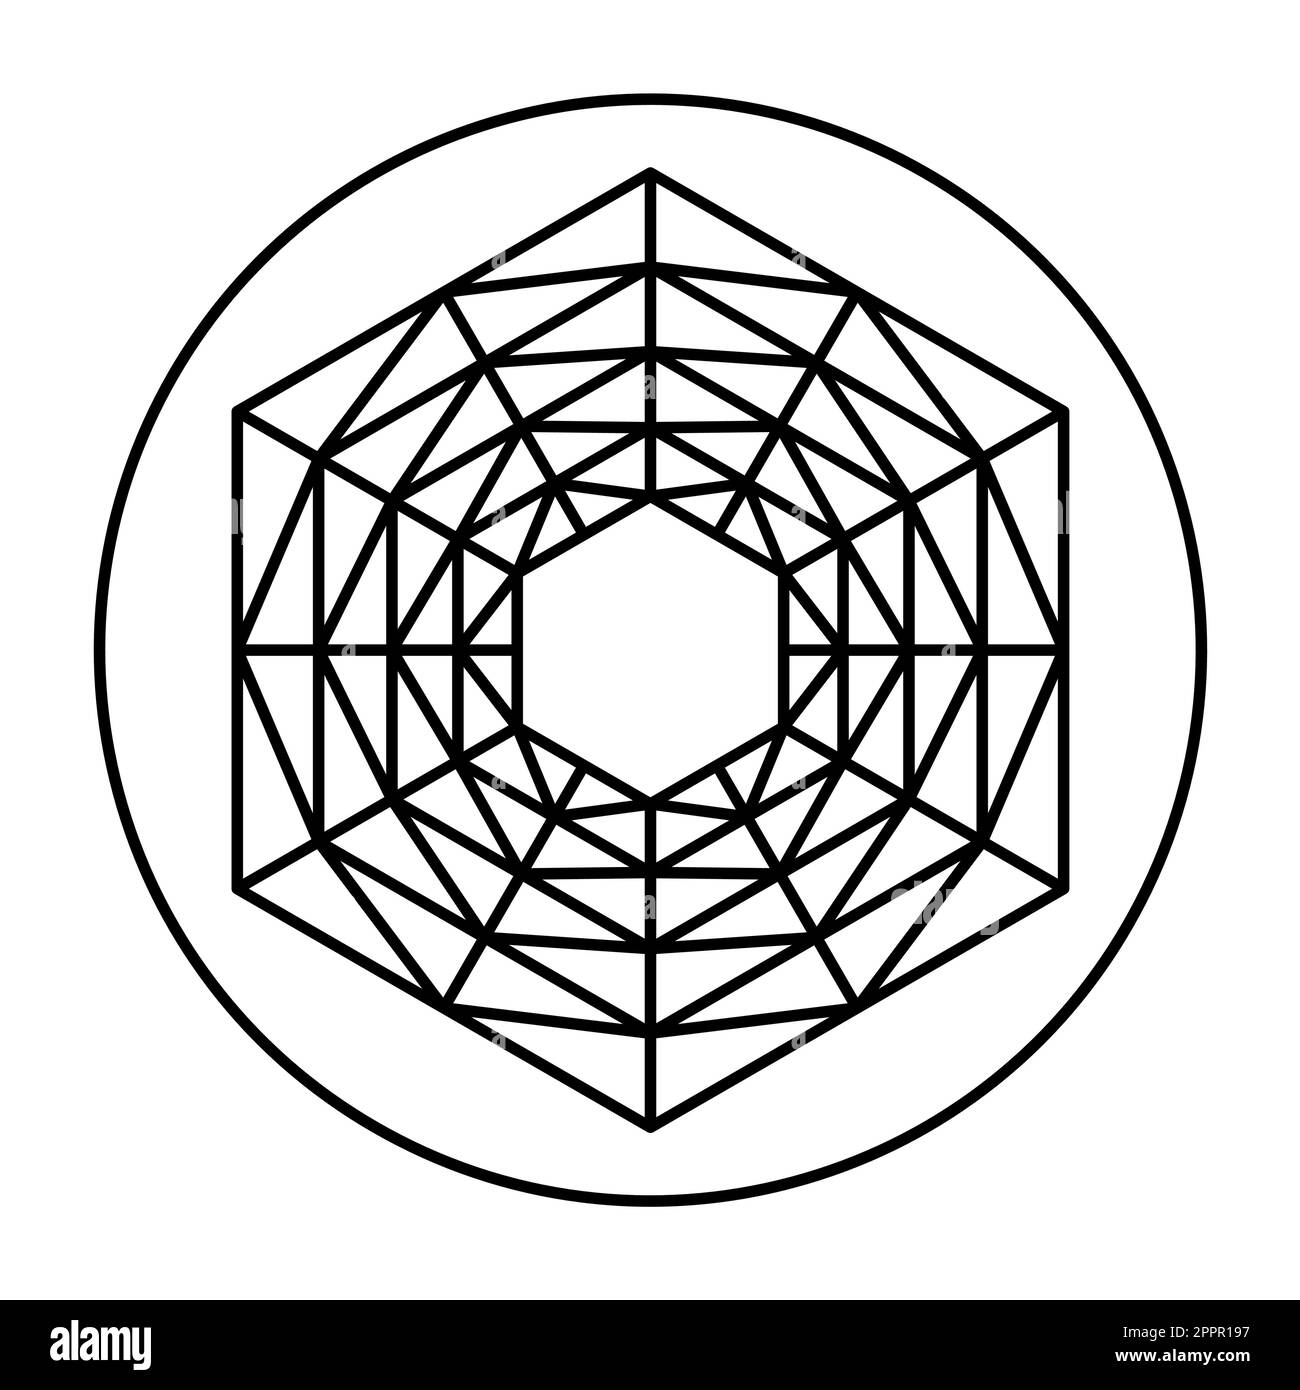 Grid pattern with symmetrical hexagonal shape, in a circle Stock Vector